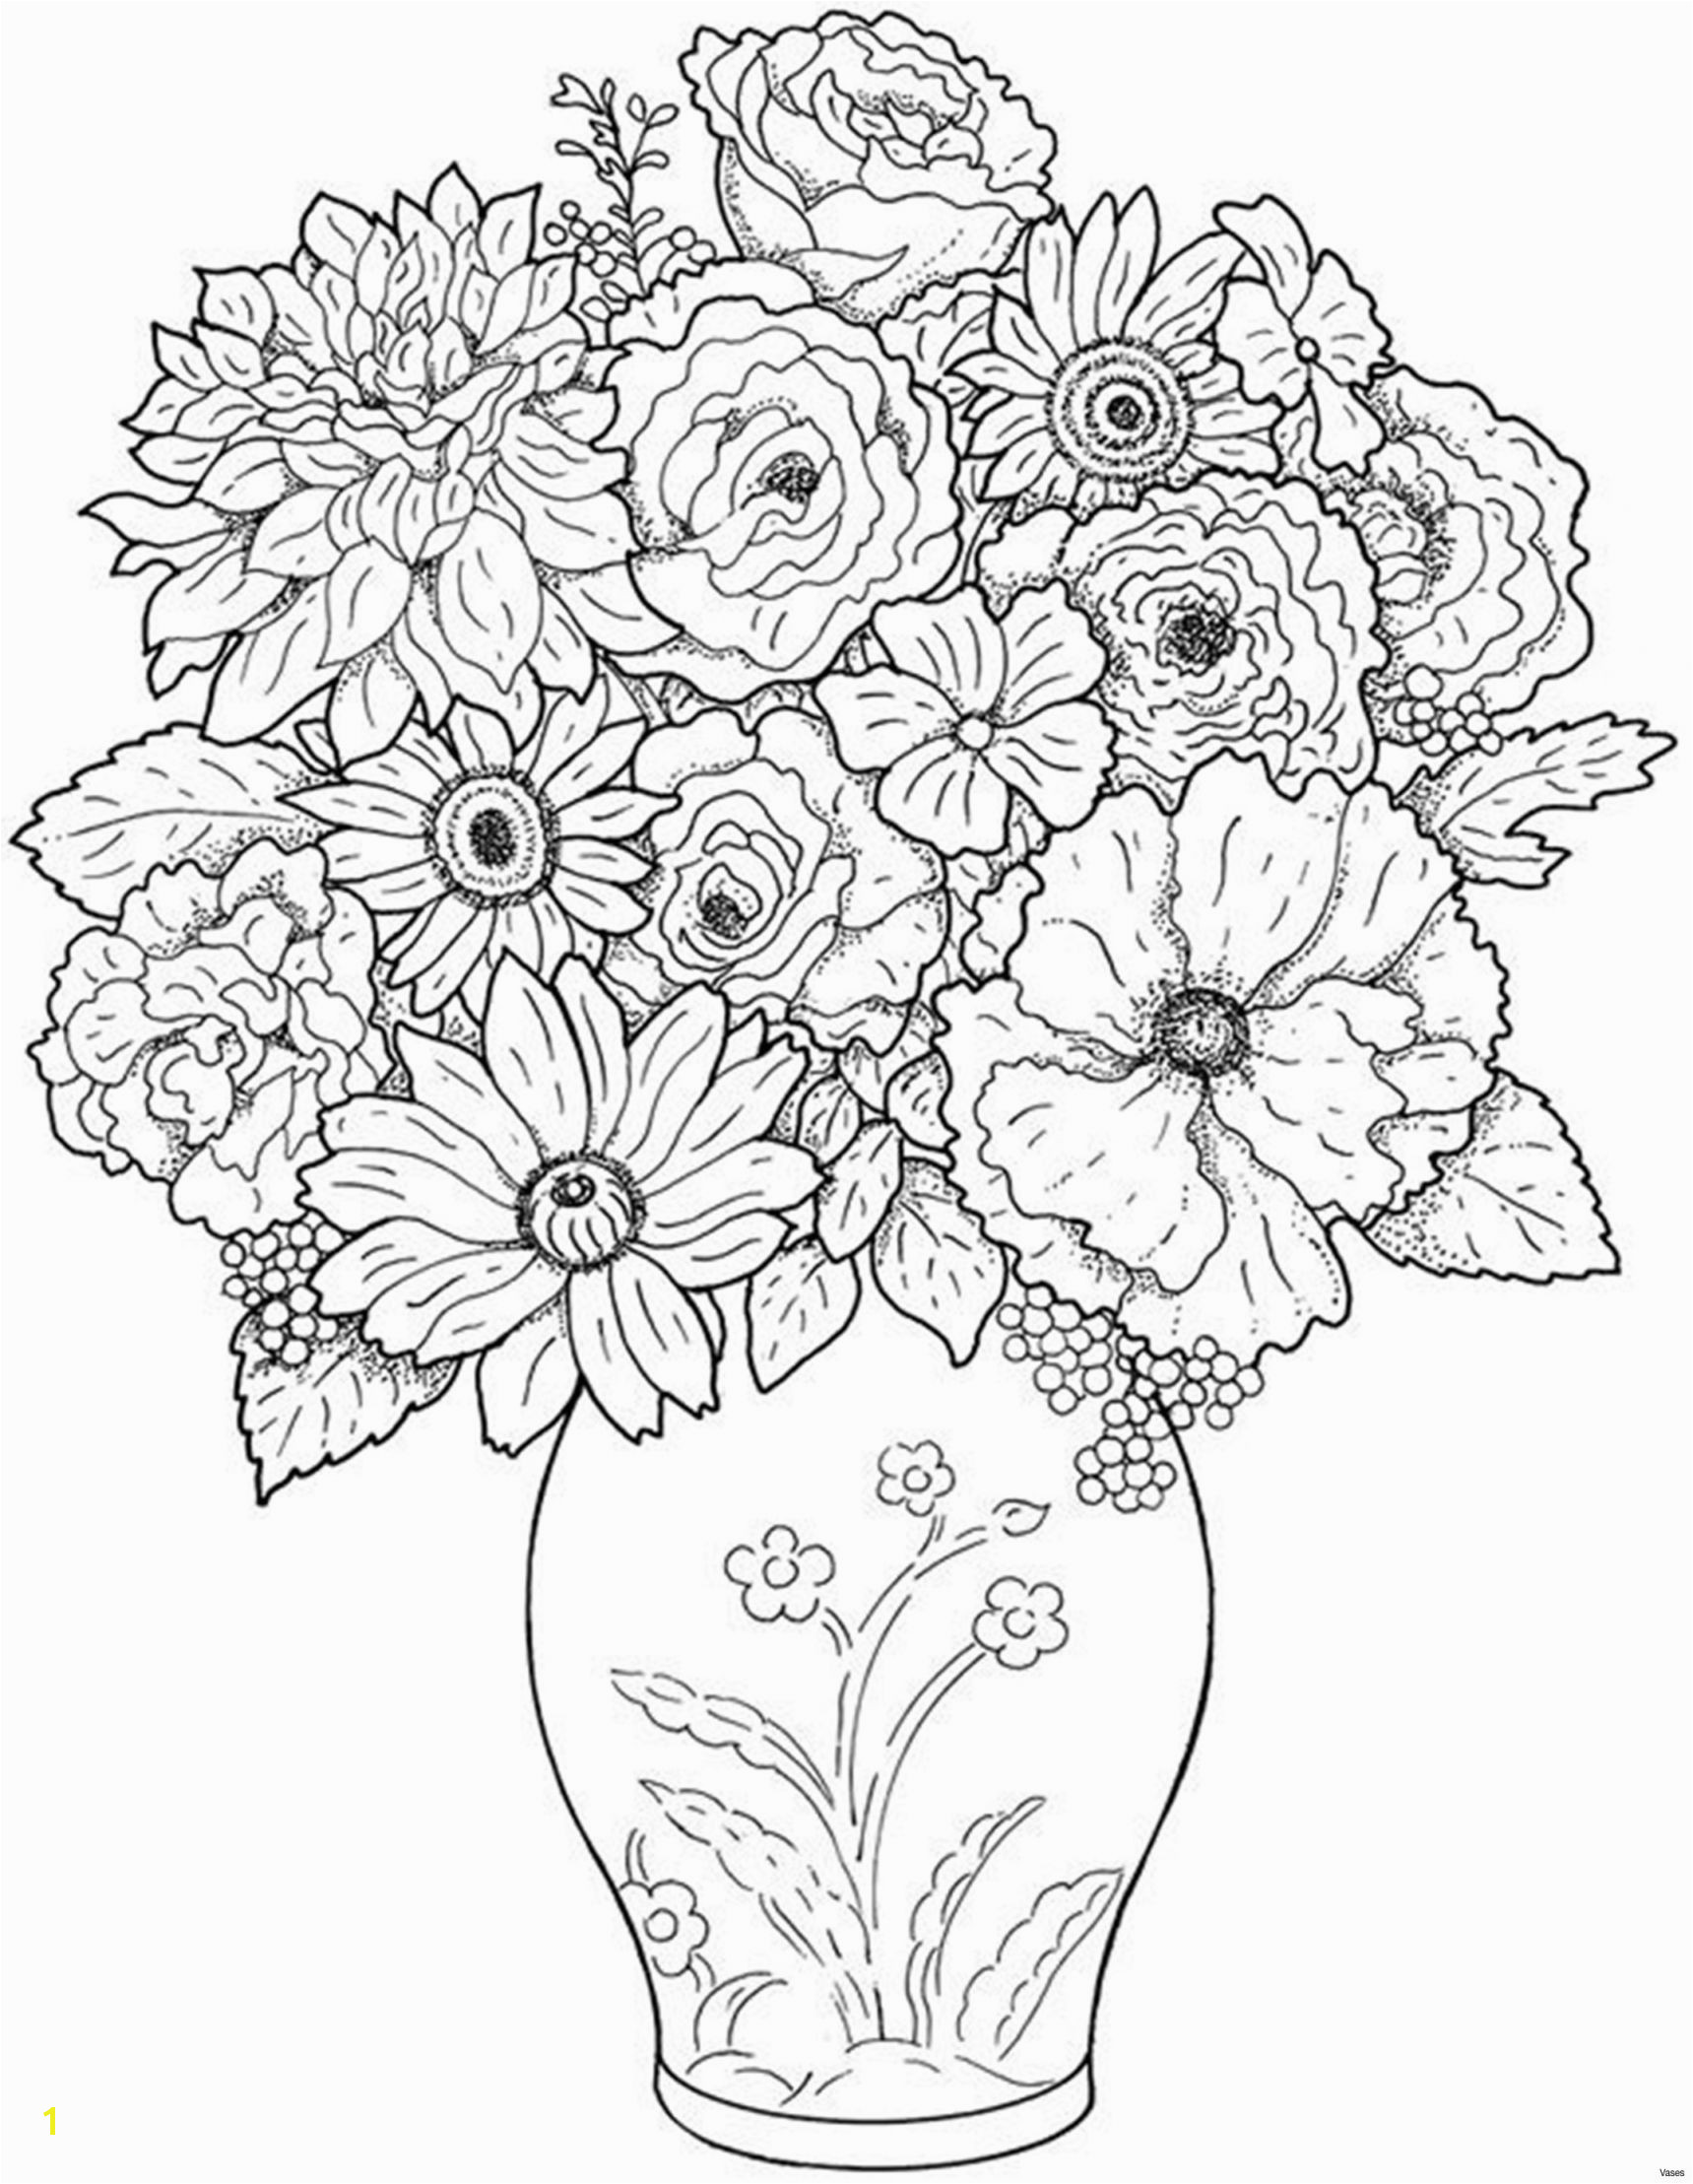 Buttercup Flower Coloring Pages Greatest Wonderful World Flowers Qs34 – Documentaries for Change